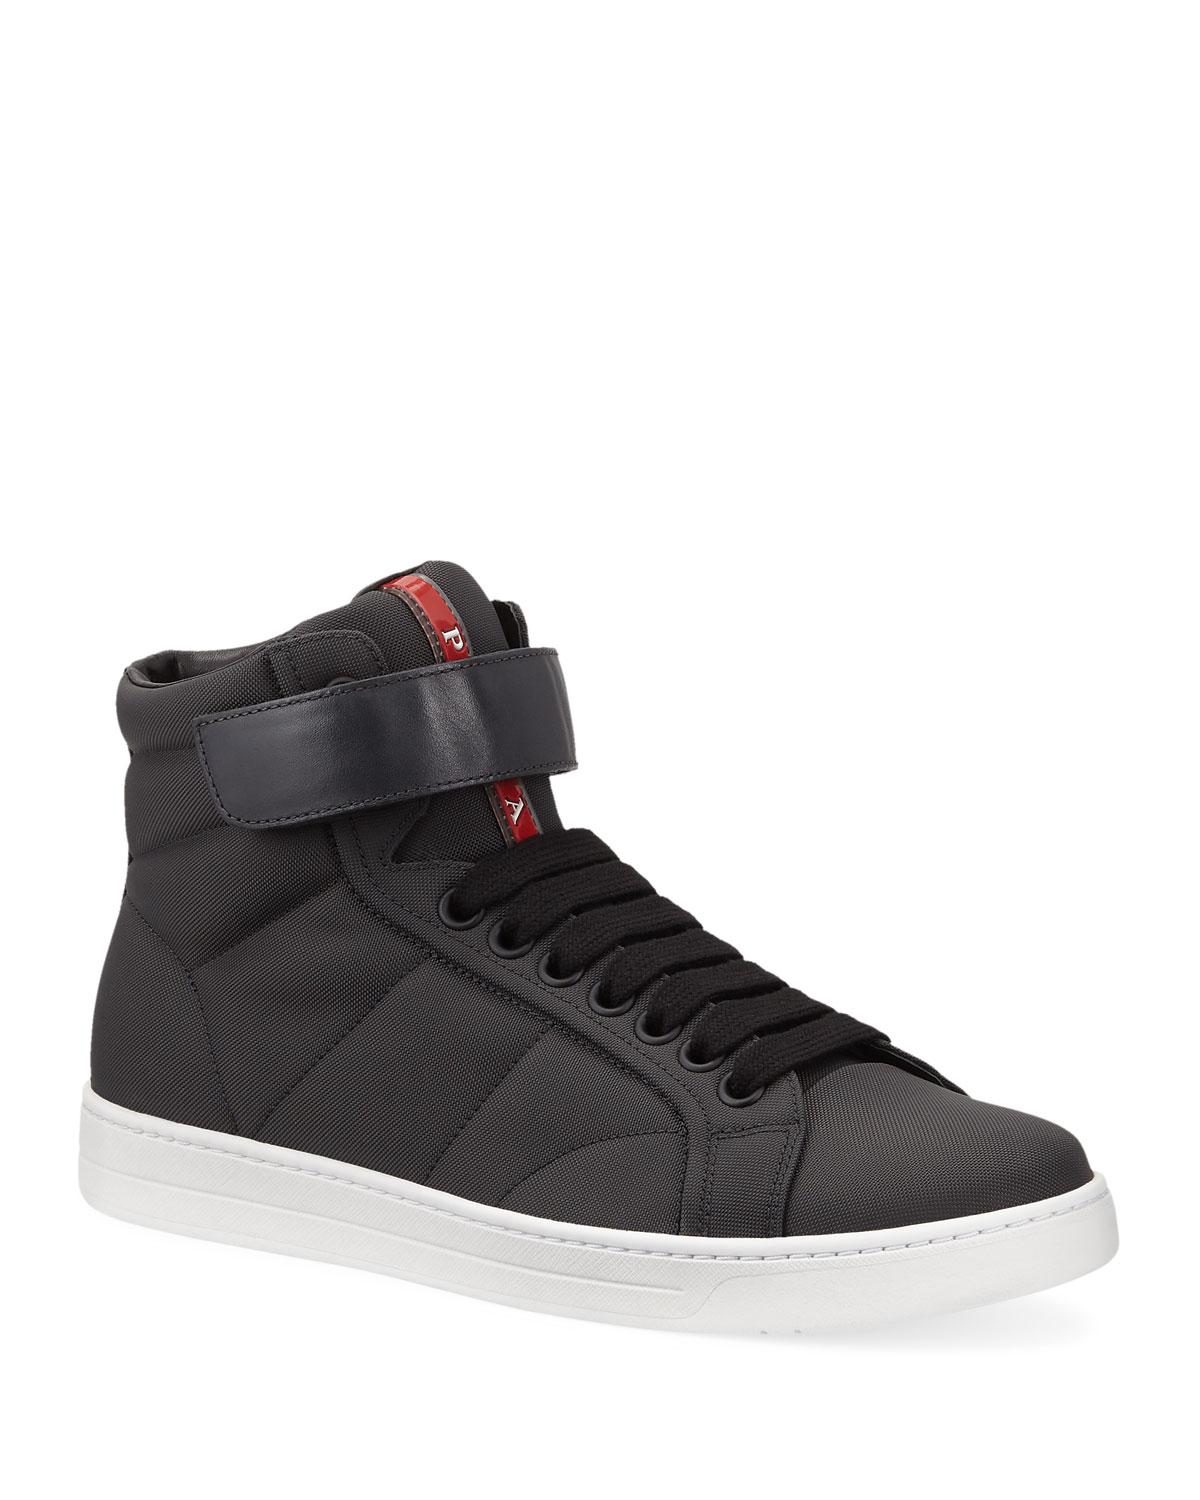 Prada Synthetic High-top Nylon Canvas Sneakers in Gray for Men - Lyst